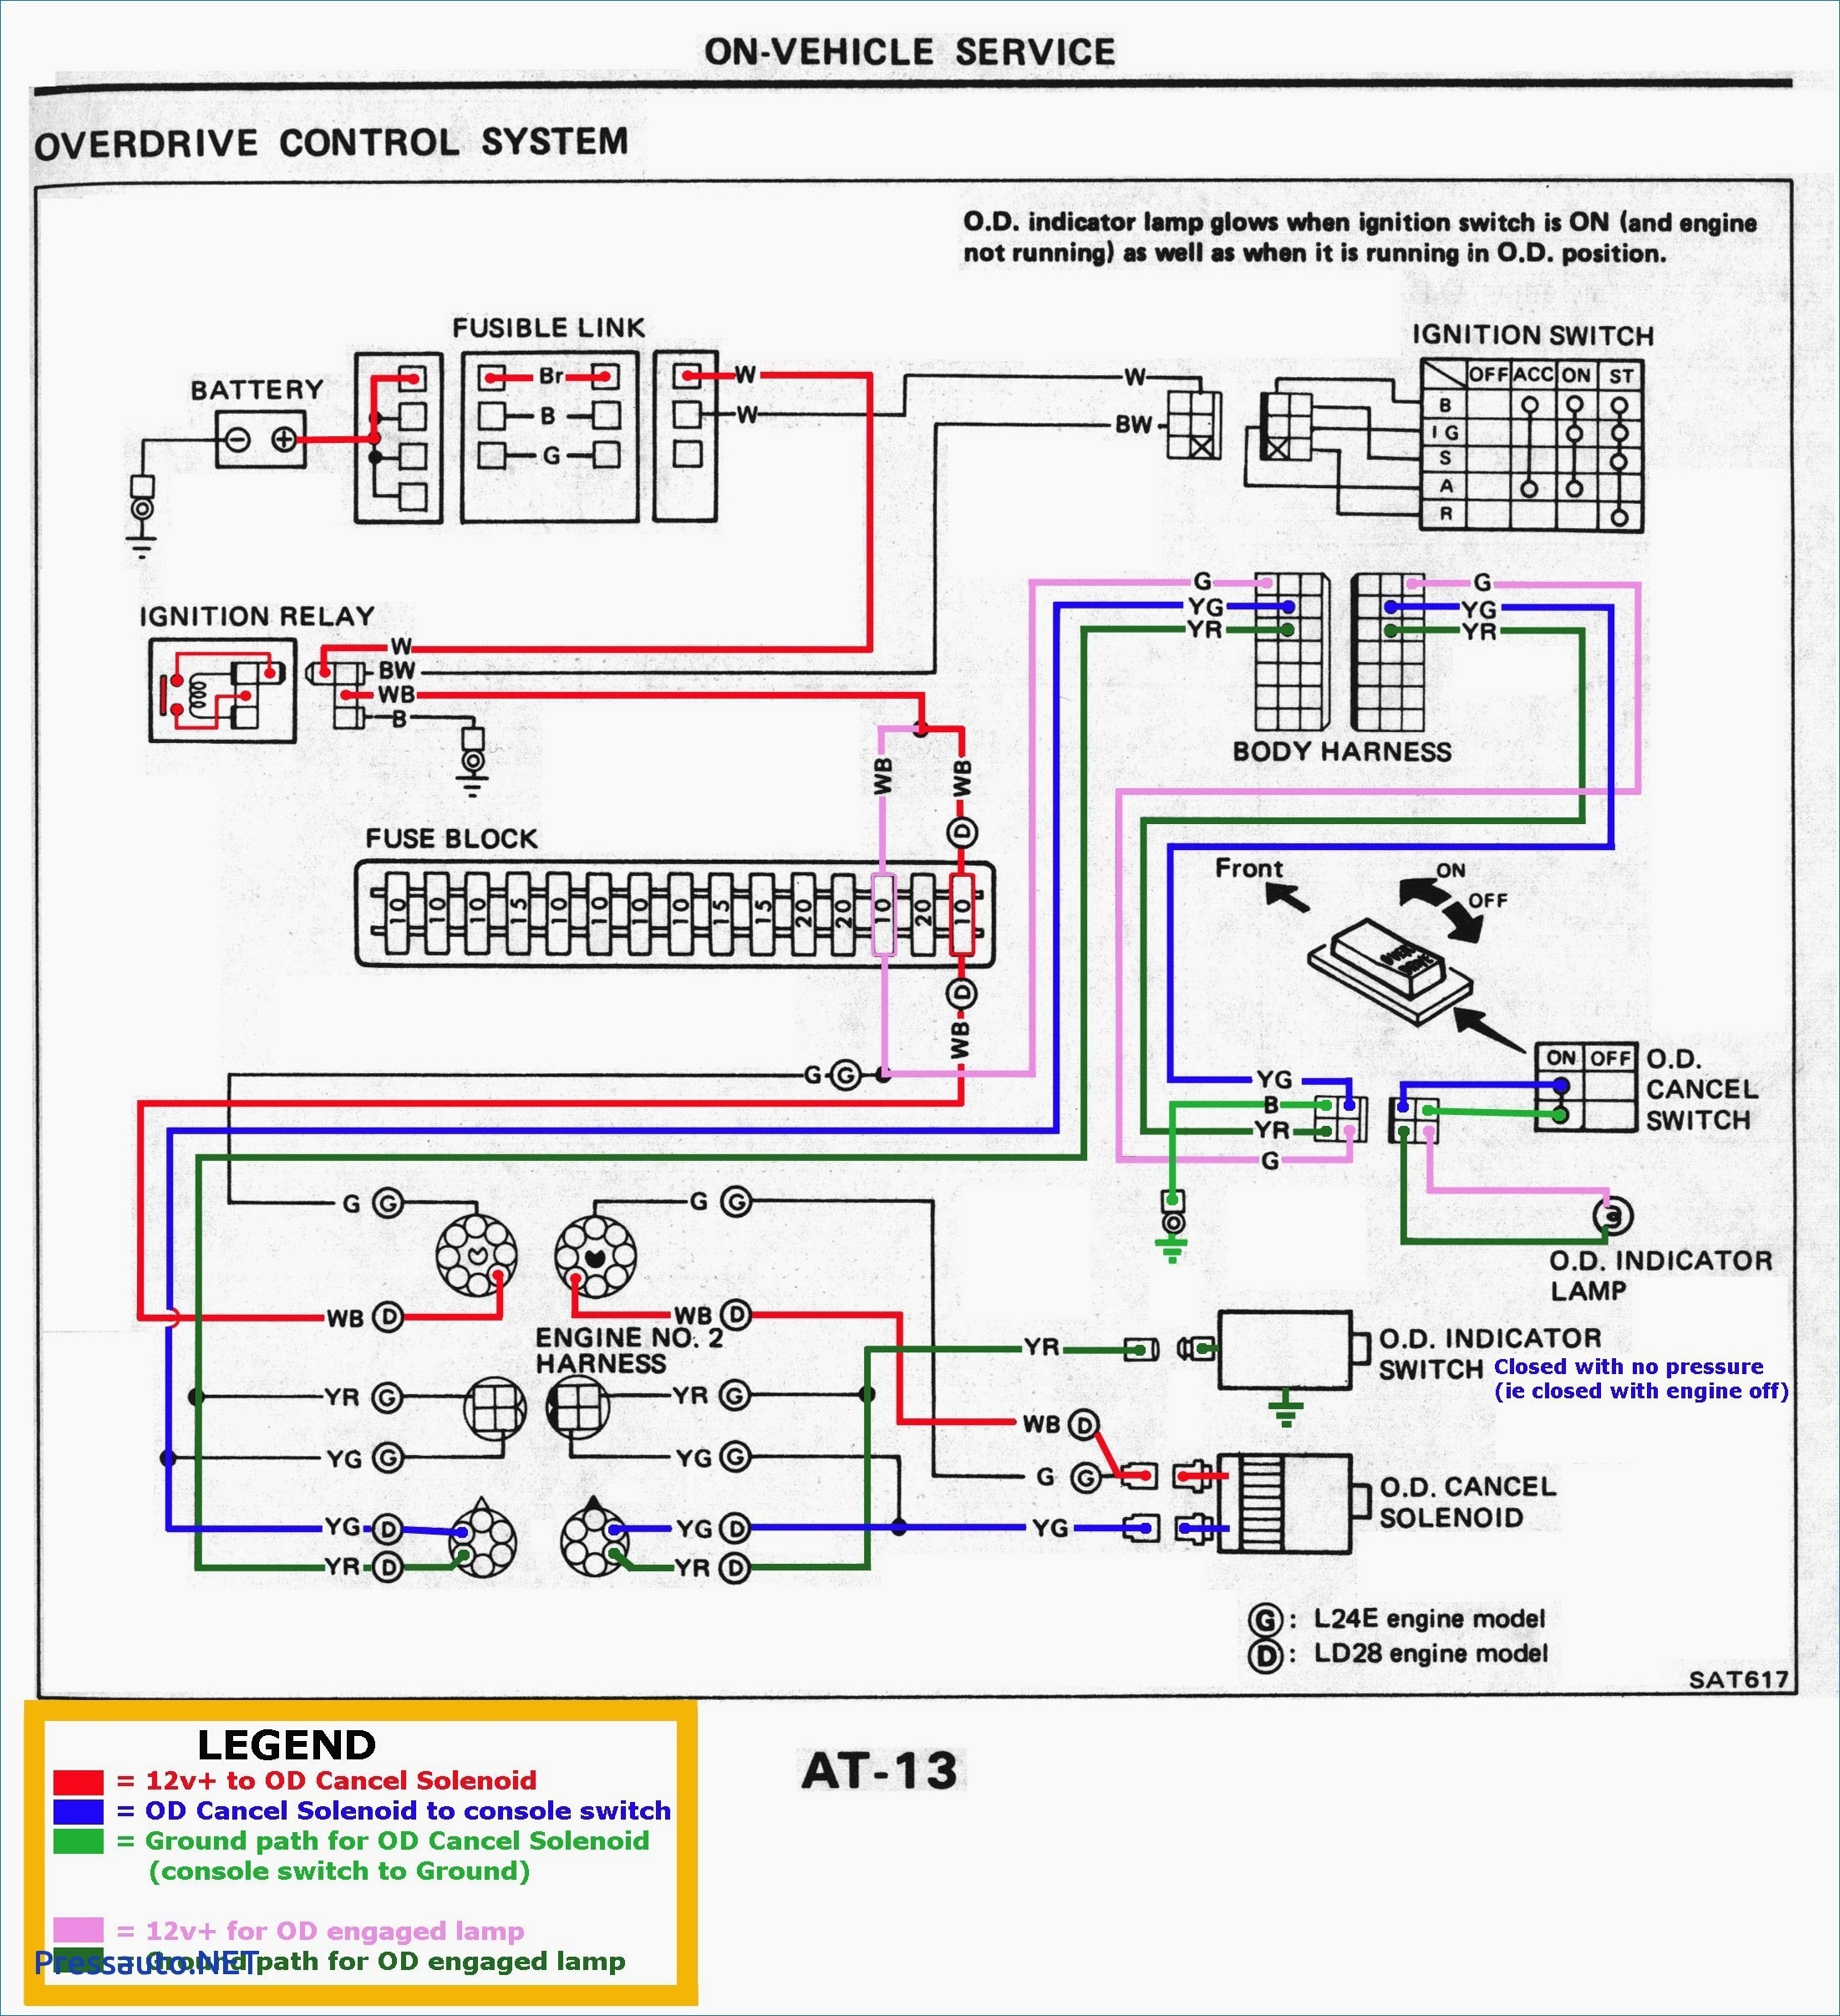 How Does A Car Engine Work Diagram Car Wiring Diagrams for Dummies Get Free Image About Wiring Diagram